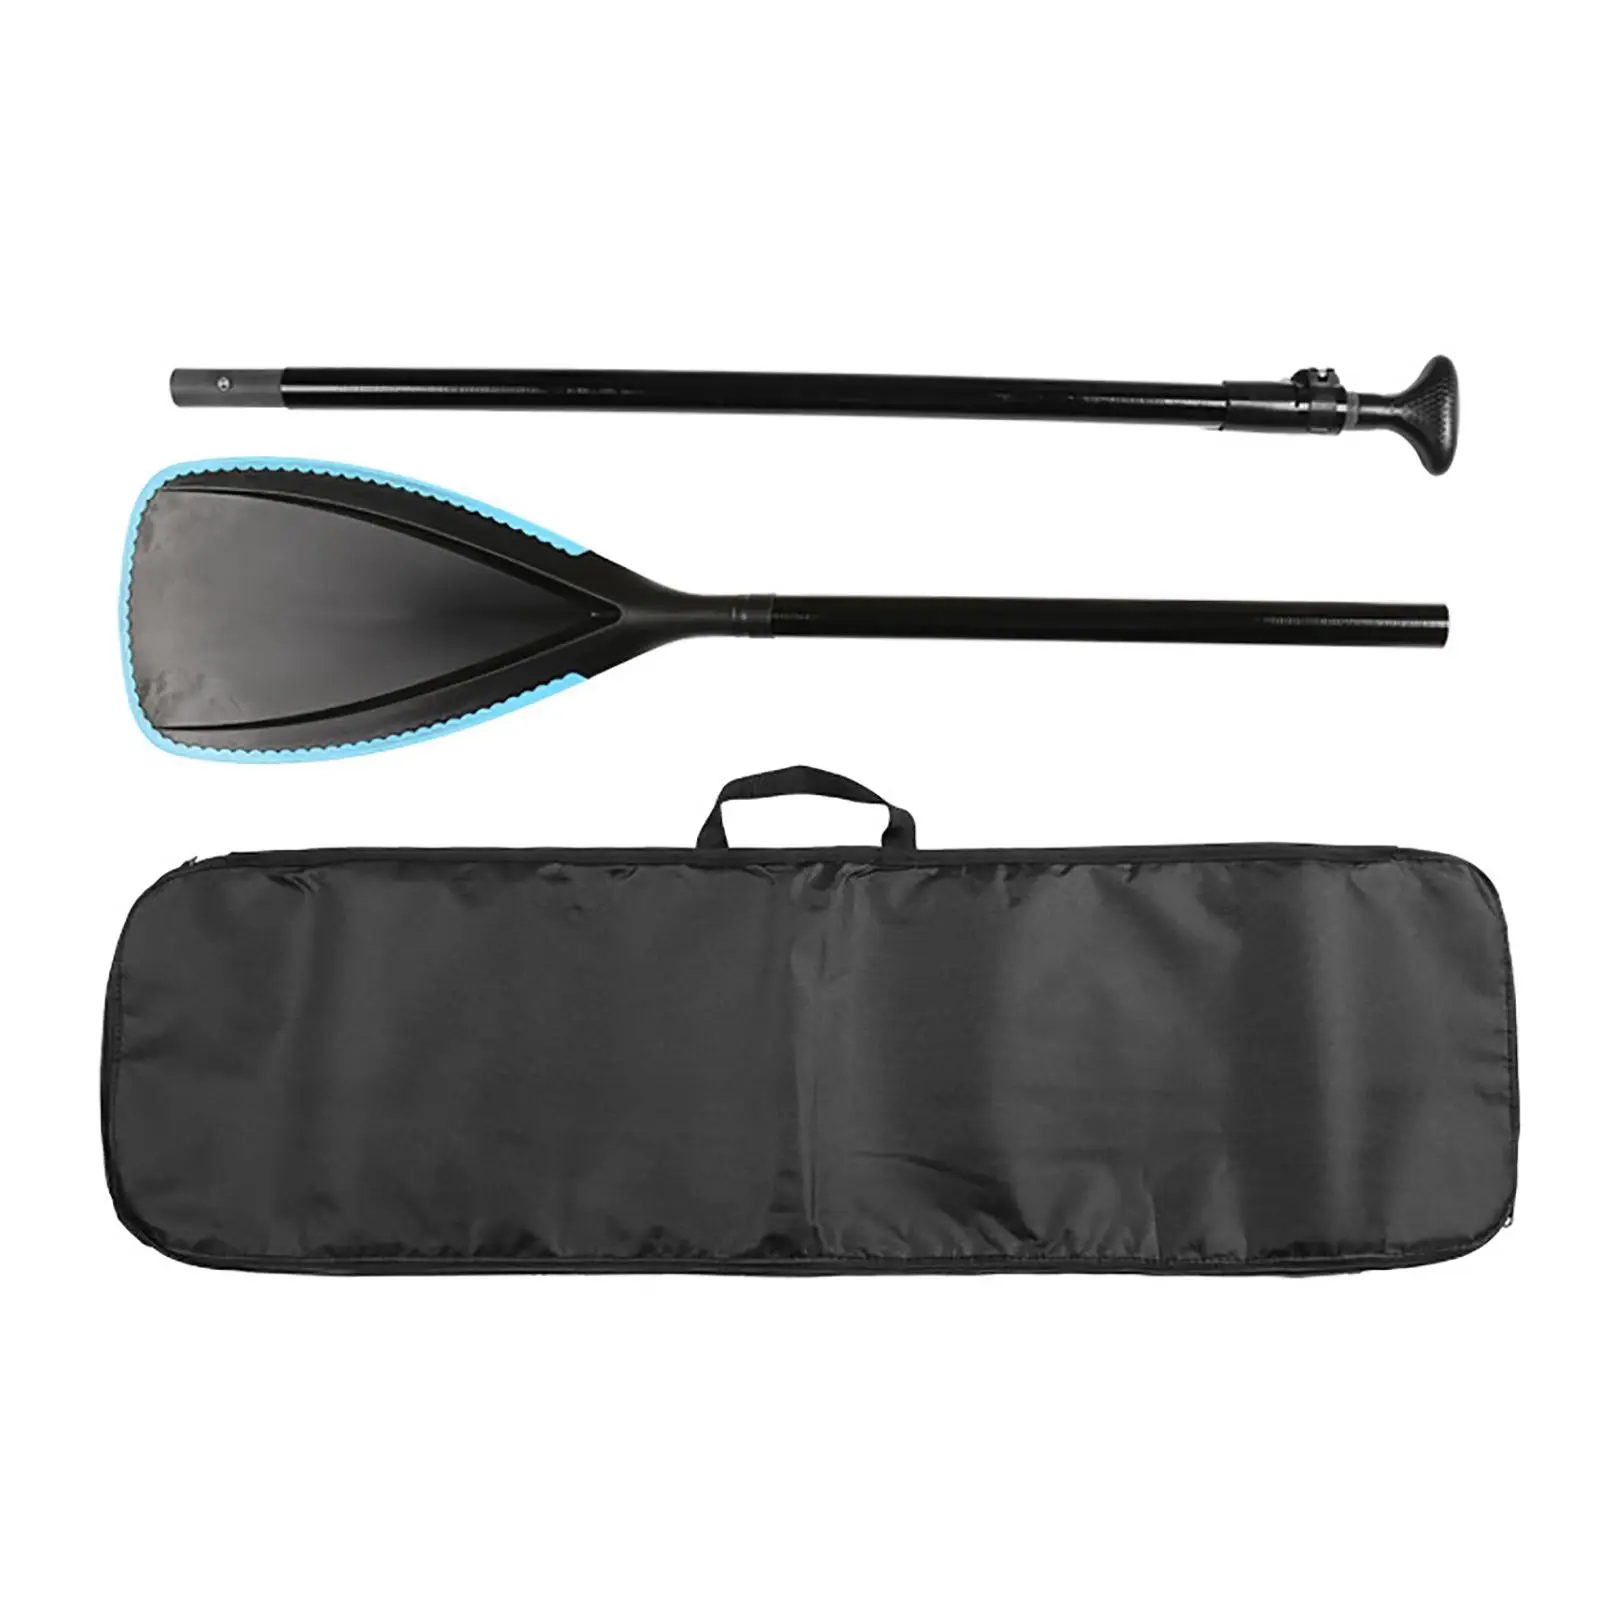 Kayak Paddle Bag Paddle Blade Storage Holder Tote with Handles Pouch Case for Surfing Boating Kayaking Stand up Paddle Canoeing